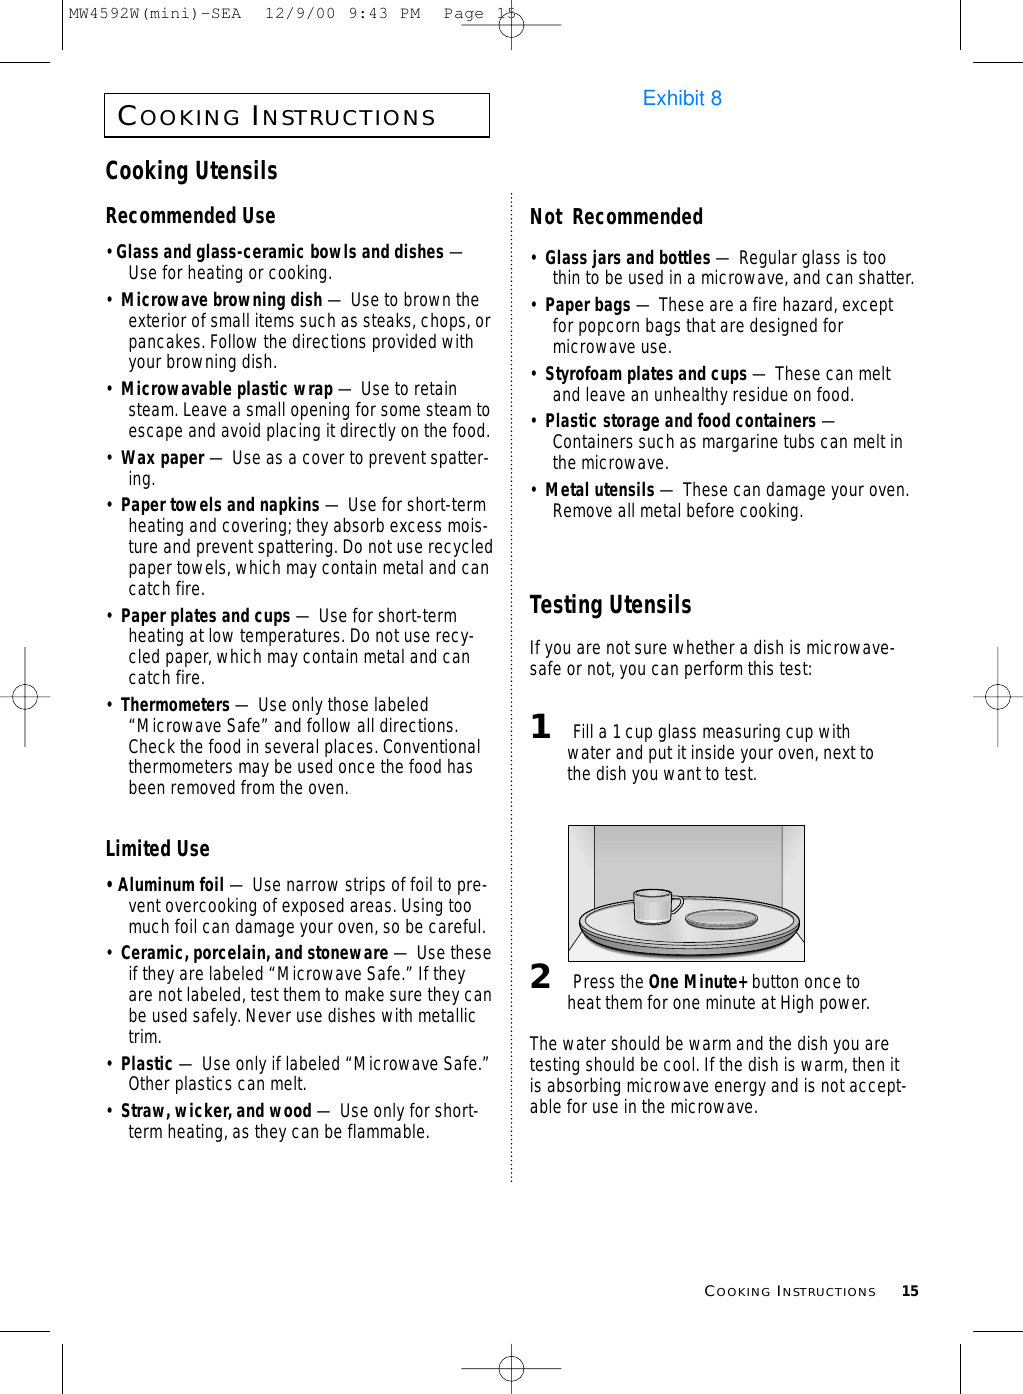 COOKINGINSTRUCTIONS15COOKINGINSTRUCTIONSCooking UtensilsRecommended Use• Glass and glass-ceramic bowls and dishes —Use for heating or cooking.•  Microwave browning dish — Use to brown theexterior of small items such as steaks, chops, orpancakes. Follow the directions provided withyour browning dish.•  Microwavable plastic wrap — Use to retainsteam. Leave a small opening for some steam toescape and avoid placing it directly on the food.•  Wax paper — Use as a cover to prevent spatter-ing.•  Paper towels and napkins — Use for short-termheating and covering; they absorb excess mois-ture and prevent spattering. Do not use recycledpaper towels, which may contain metal and cancatch fire.•  Paper plates and cups — Use for short-termheating at low temperatures. Do not use recy-cled paper, which may contain metal and cancatch fire.•  Thermometers — Use only those labeled“Microwave Safe” and follow all directions.Check the food in several places. Conventionalthermometers may be used once the food hasbeen removed from the oven.Limited Use• Aluminum foil — Use narrow strips of foil to pre-vent overcooking of exposed areas. Using toomuch foil can damage your oven, so be careful.•  Ceramic, porcelain, and stoneware — Use theseif they are labeled “Microwave Safe.” If theyare not labeled, test them to make sure they canbe used safely. Never use dishes with metallictrim.•  Plastic — Use only if labeled “Microwave Safe.”Other plastics can melt.•  Straw, wicker, and wood — Use only for short-term heating, as they can be flammable.Not  Recommended•  Glass jars and bottles — Regular glass is toothin to be used in a microwave, and can shatter.•  Paper bags — These are a fire hazard, exceptfor popcorn bags that are designed formicrowave use.•  Styrofoam plates and cups — These can meltand leave an unhealthy residue on food.•  Plastic storage and food containers —Containers such as margarine tubs can melt inthe microwave.•  Metal utensils — These can damage your oven.Remove all metal before cooking. Testing UtensilsIf you are not sure whether a dish is microwave-safe or not, you can perform this test:1Fill a 1 cup glass measuring cup withwater and put it inside your oven, next tothe dish you want to test.2Press the One Minute+ button once toheat them for one minute at High power.The water should be warm and the dish you aretesting should be cool. If the dish is warm, then itis absorbing microwave energy and is not accept-able for use in the microwave.MW4592W(mini)-SEA  12/9/00 9:43 PM  Page 15Exhibit 8